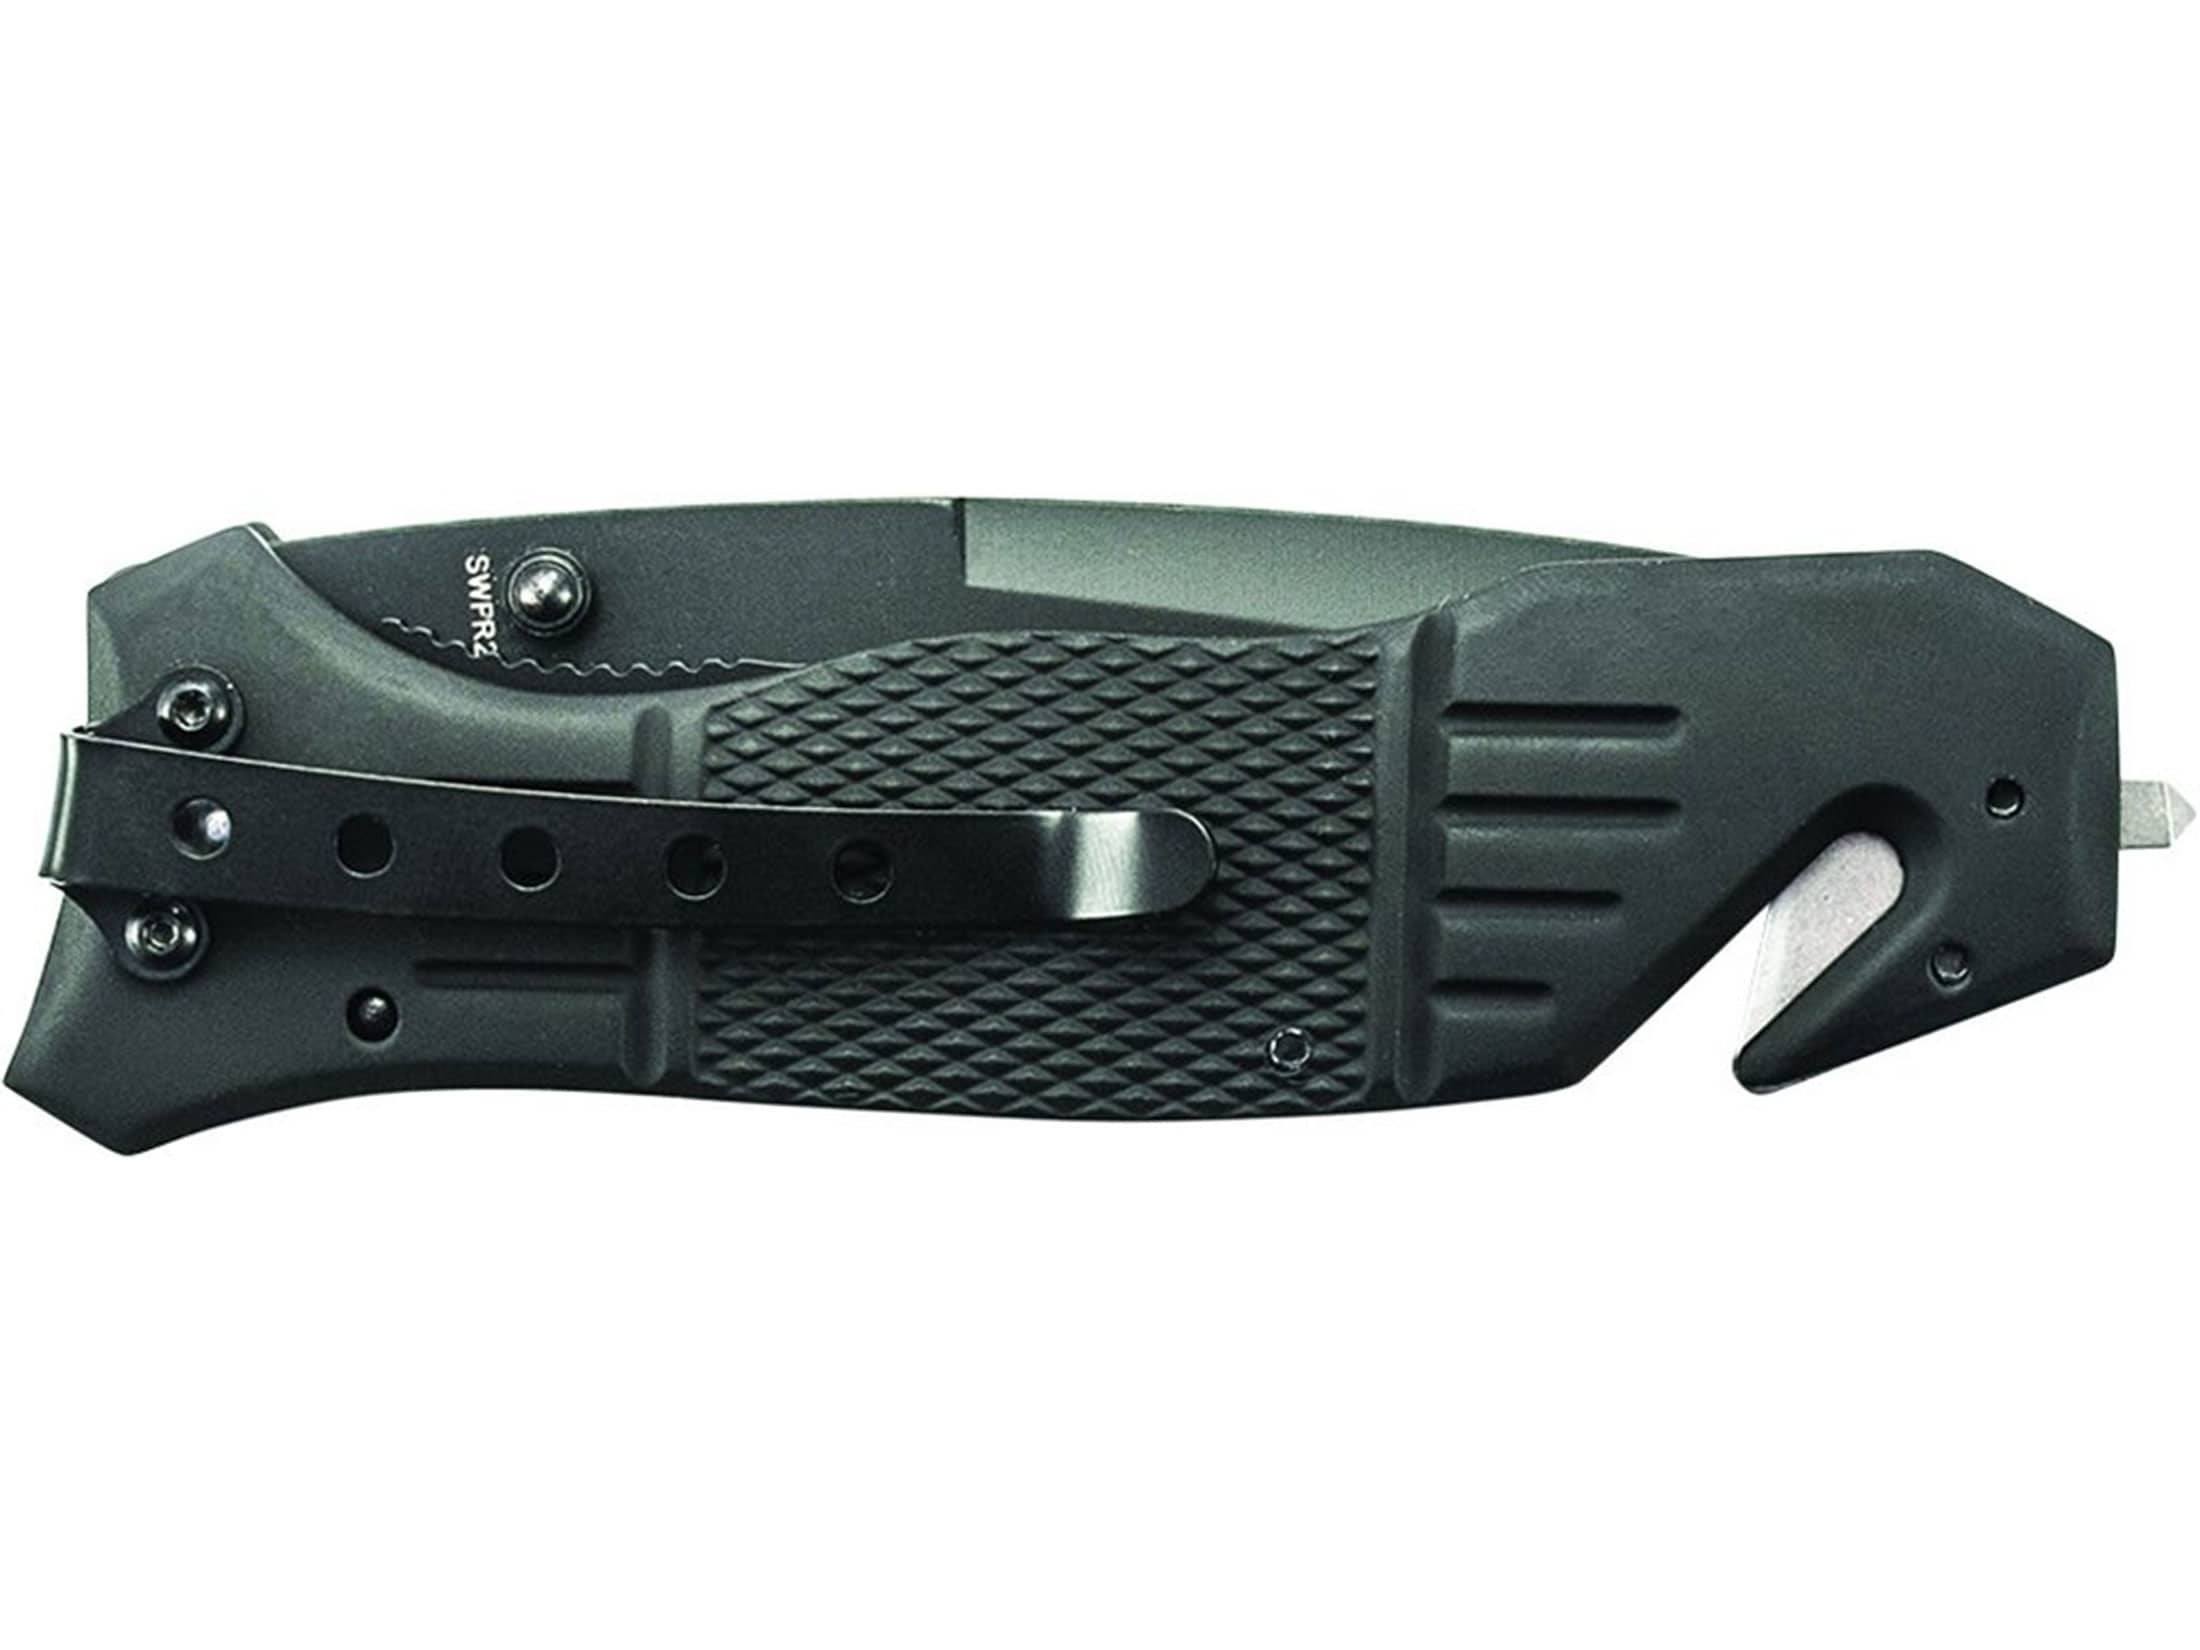 Smith & Wesson Extreme Ops Folding Pocket Knife 3.3″ Tanto Point 7Cr17 High Carbon Stainless Steel Blade with Belt Cutter Alminum Handle Black For Sale